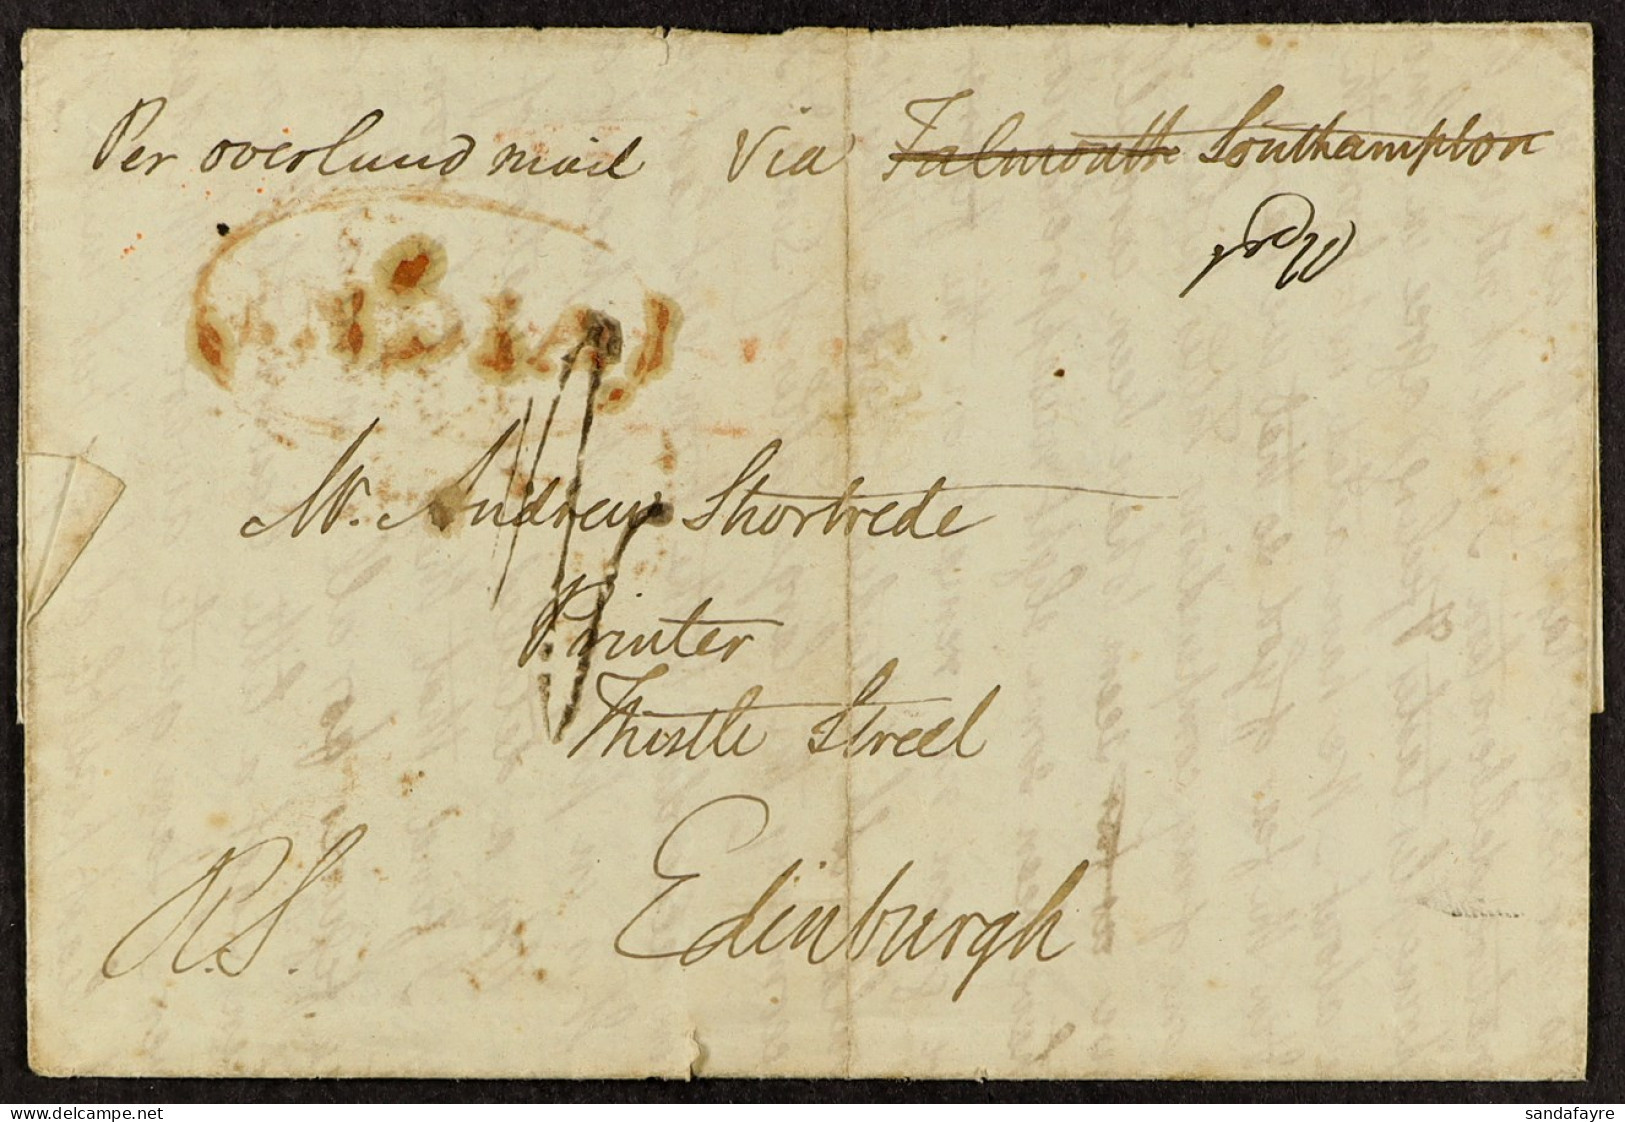 STAMP - 1843 (19th Dec) A Letter With A Number Of Postal Markings From Allahabad, INDIA, To Edinburgh, Scotland, Via Sou - ...-1840 Vorläufer